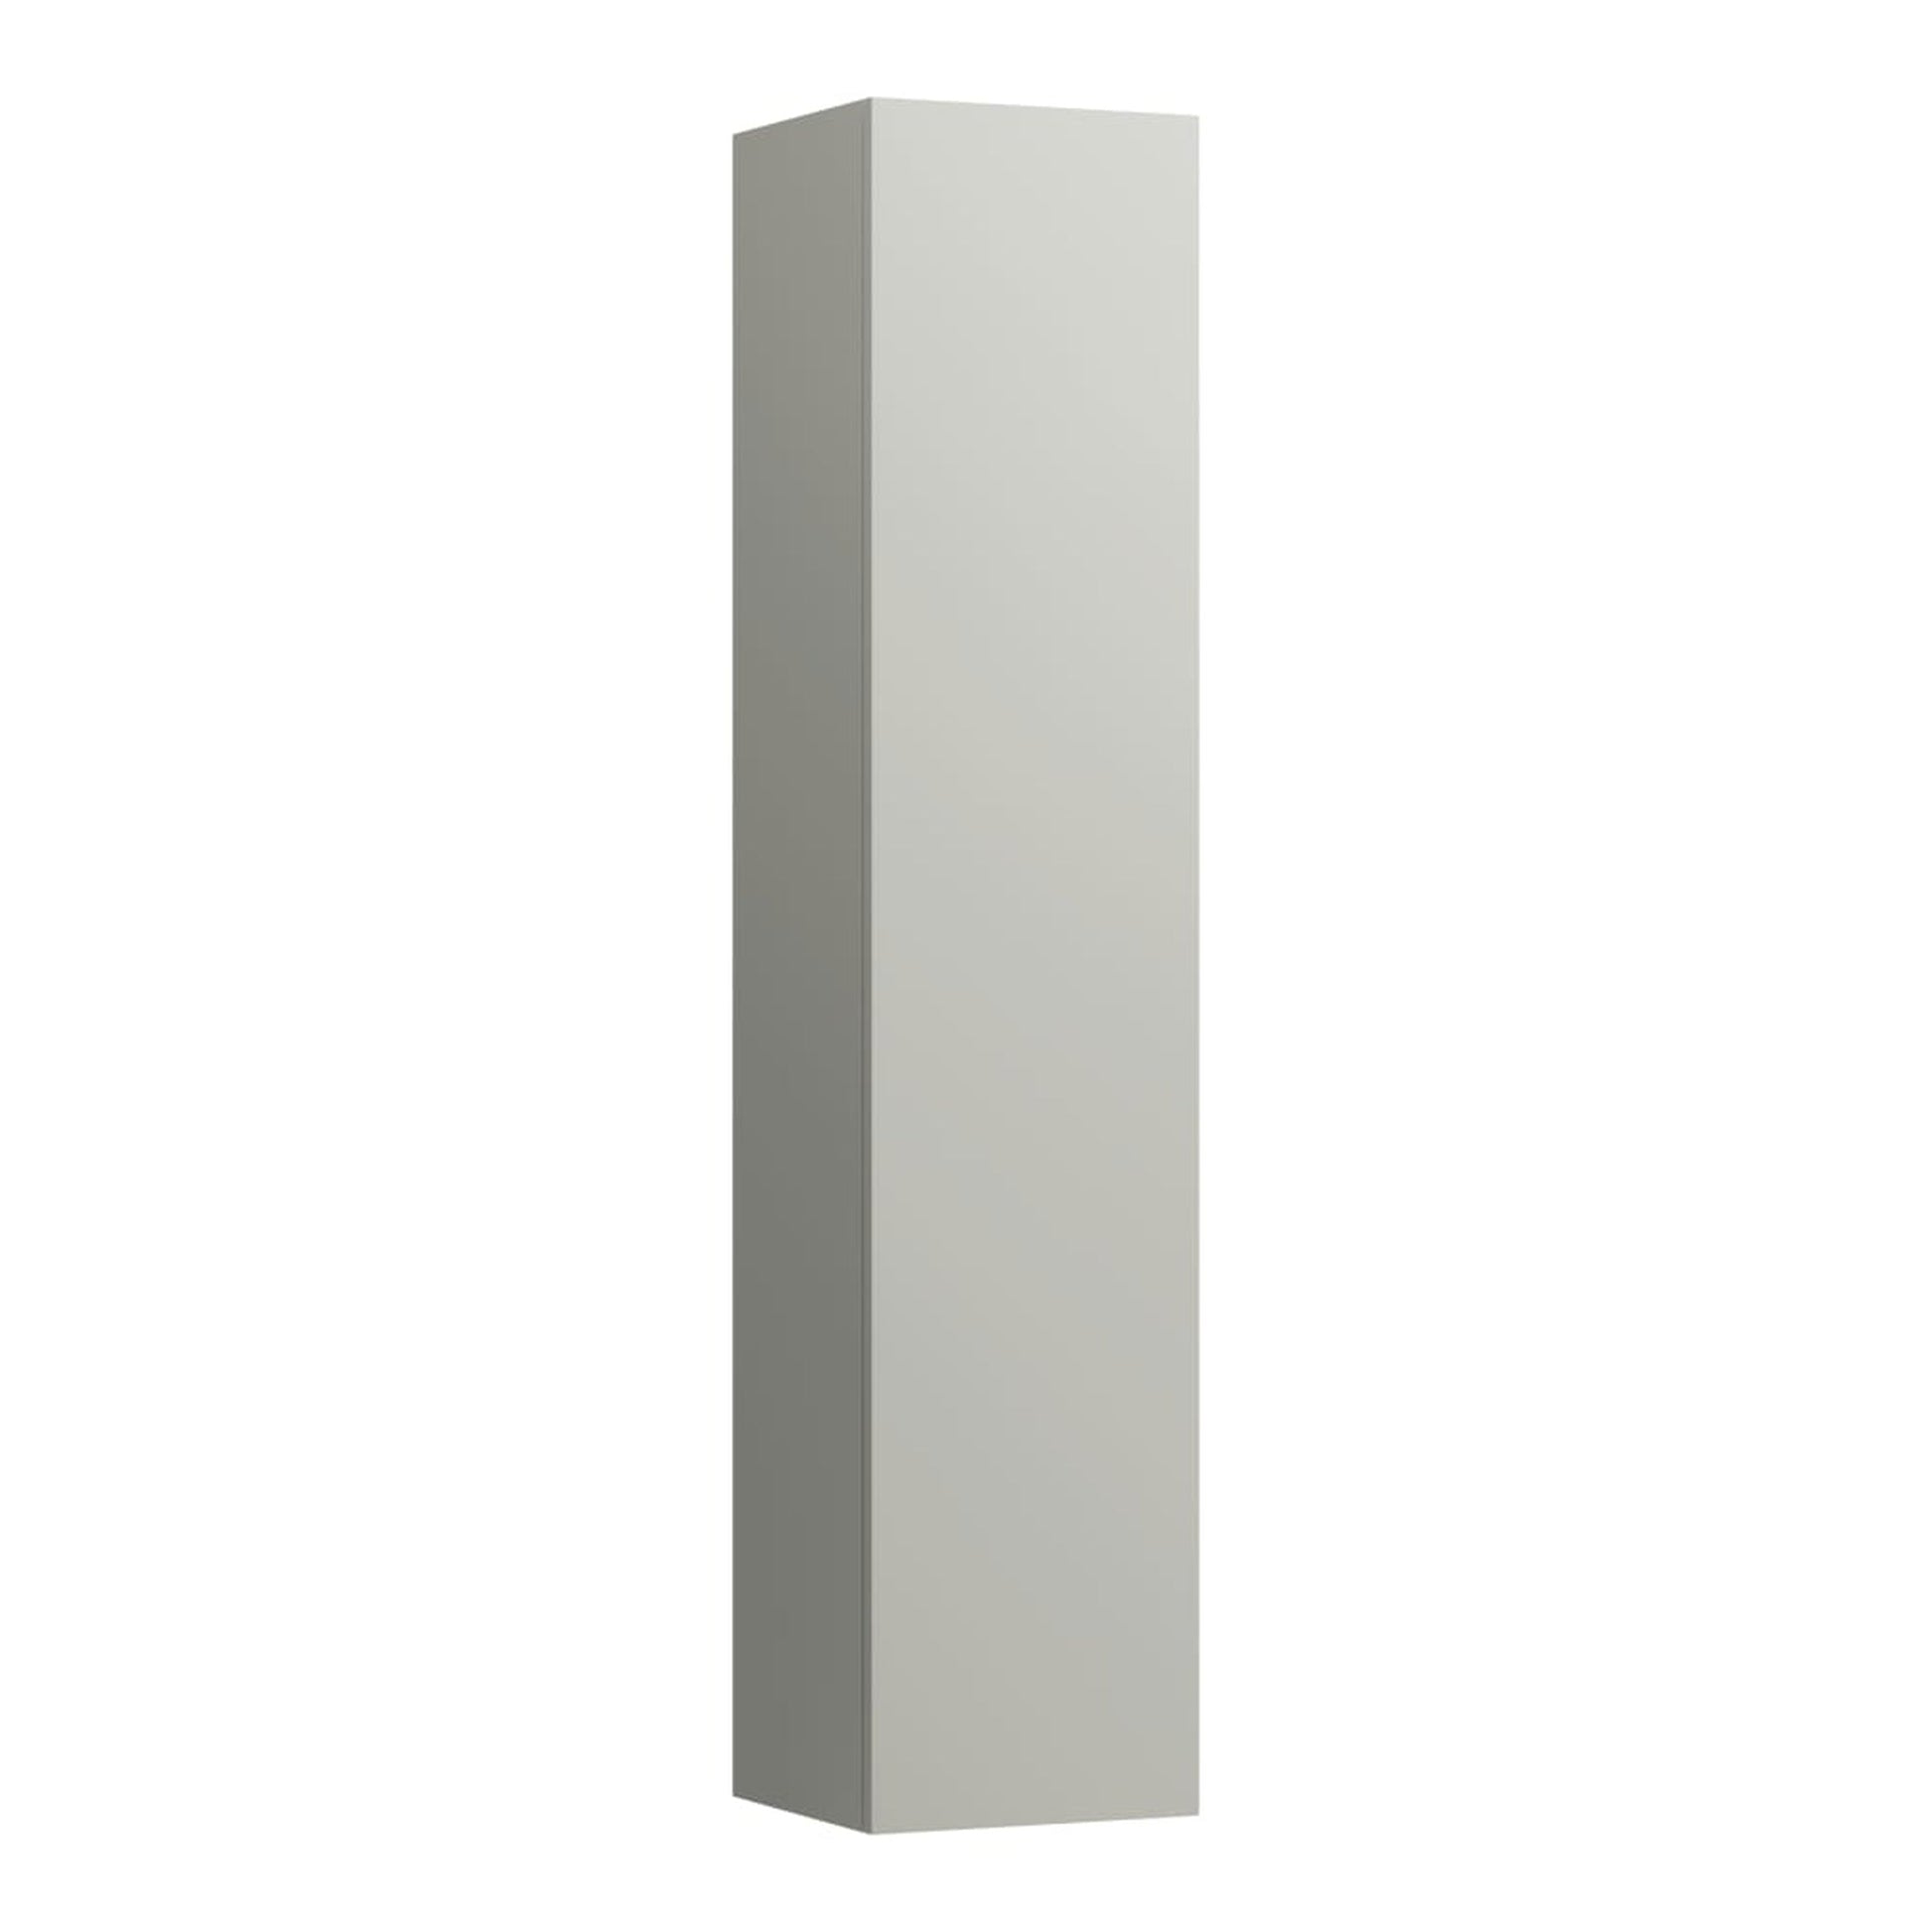 Laufen Kartell 14" x 65" 1-Door Left-Hinged Pebble Gray Wall-Mounted Tall Cabinet With 4 Fixed Glass Shelves